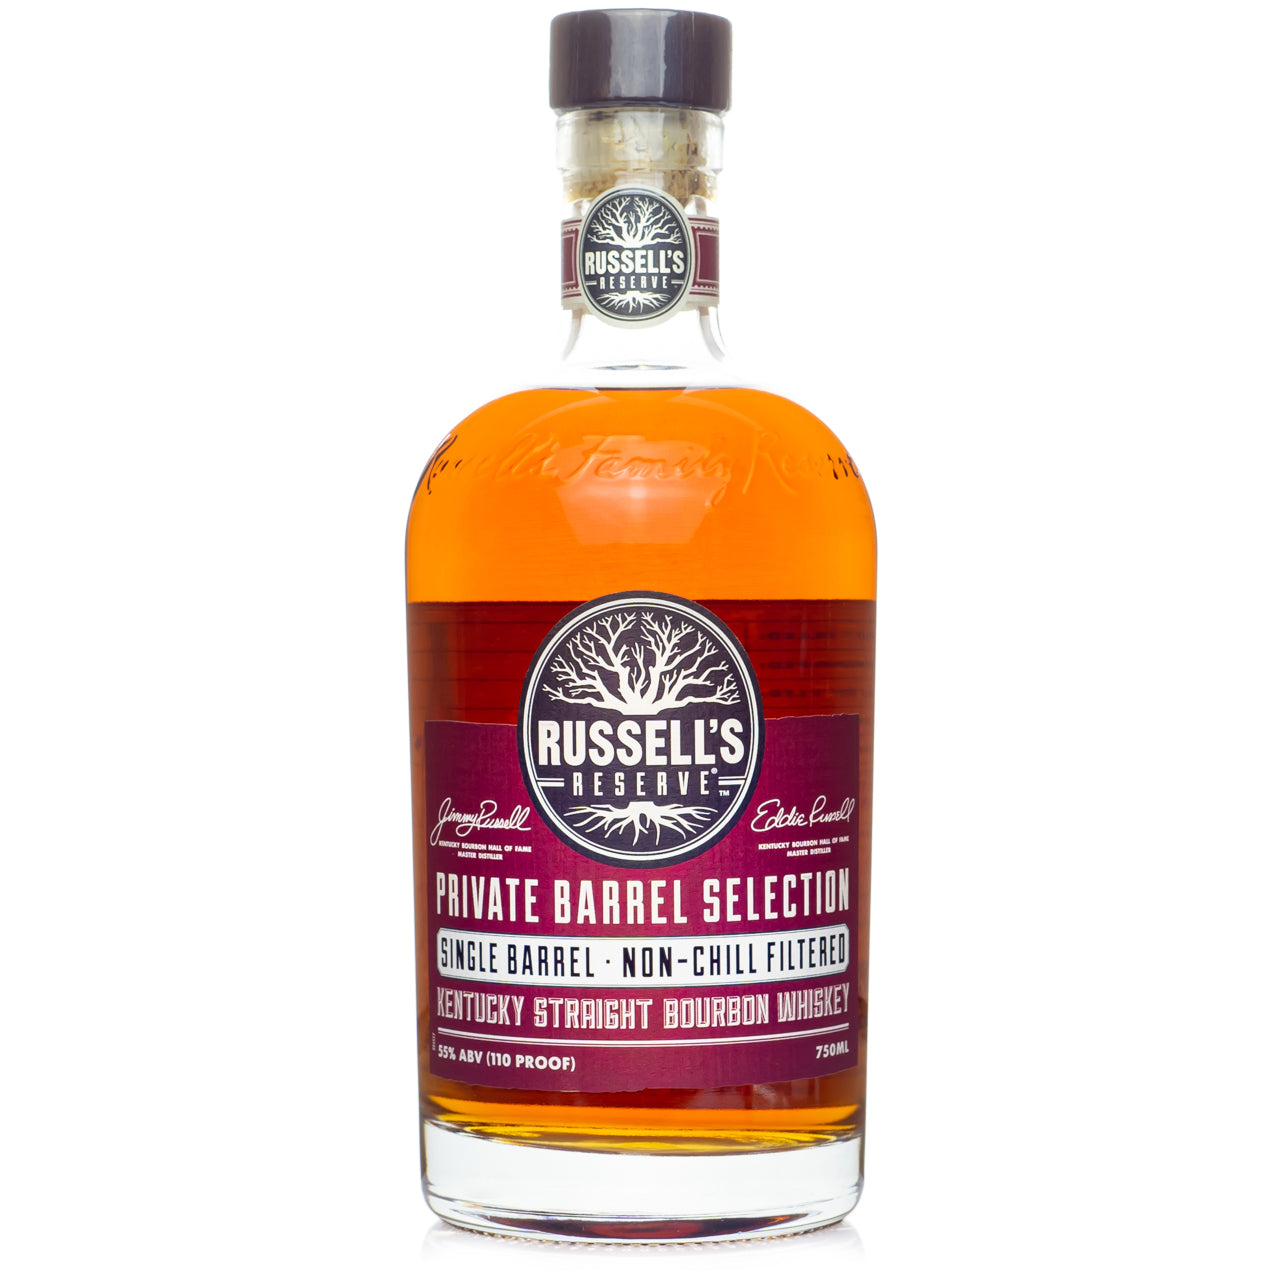 Russell's Reserve Private Barrel "Warehouse Q" Bourbon